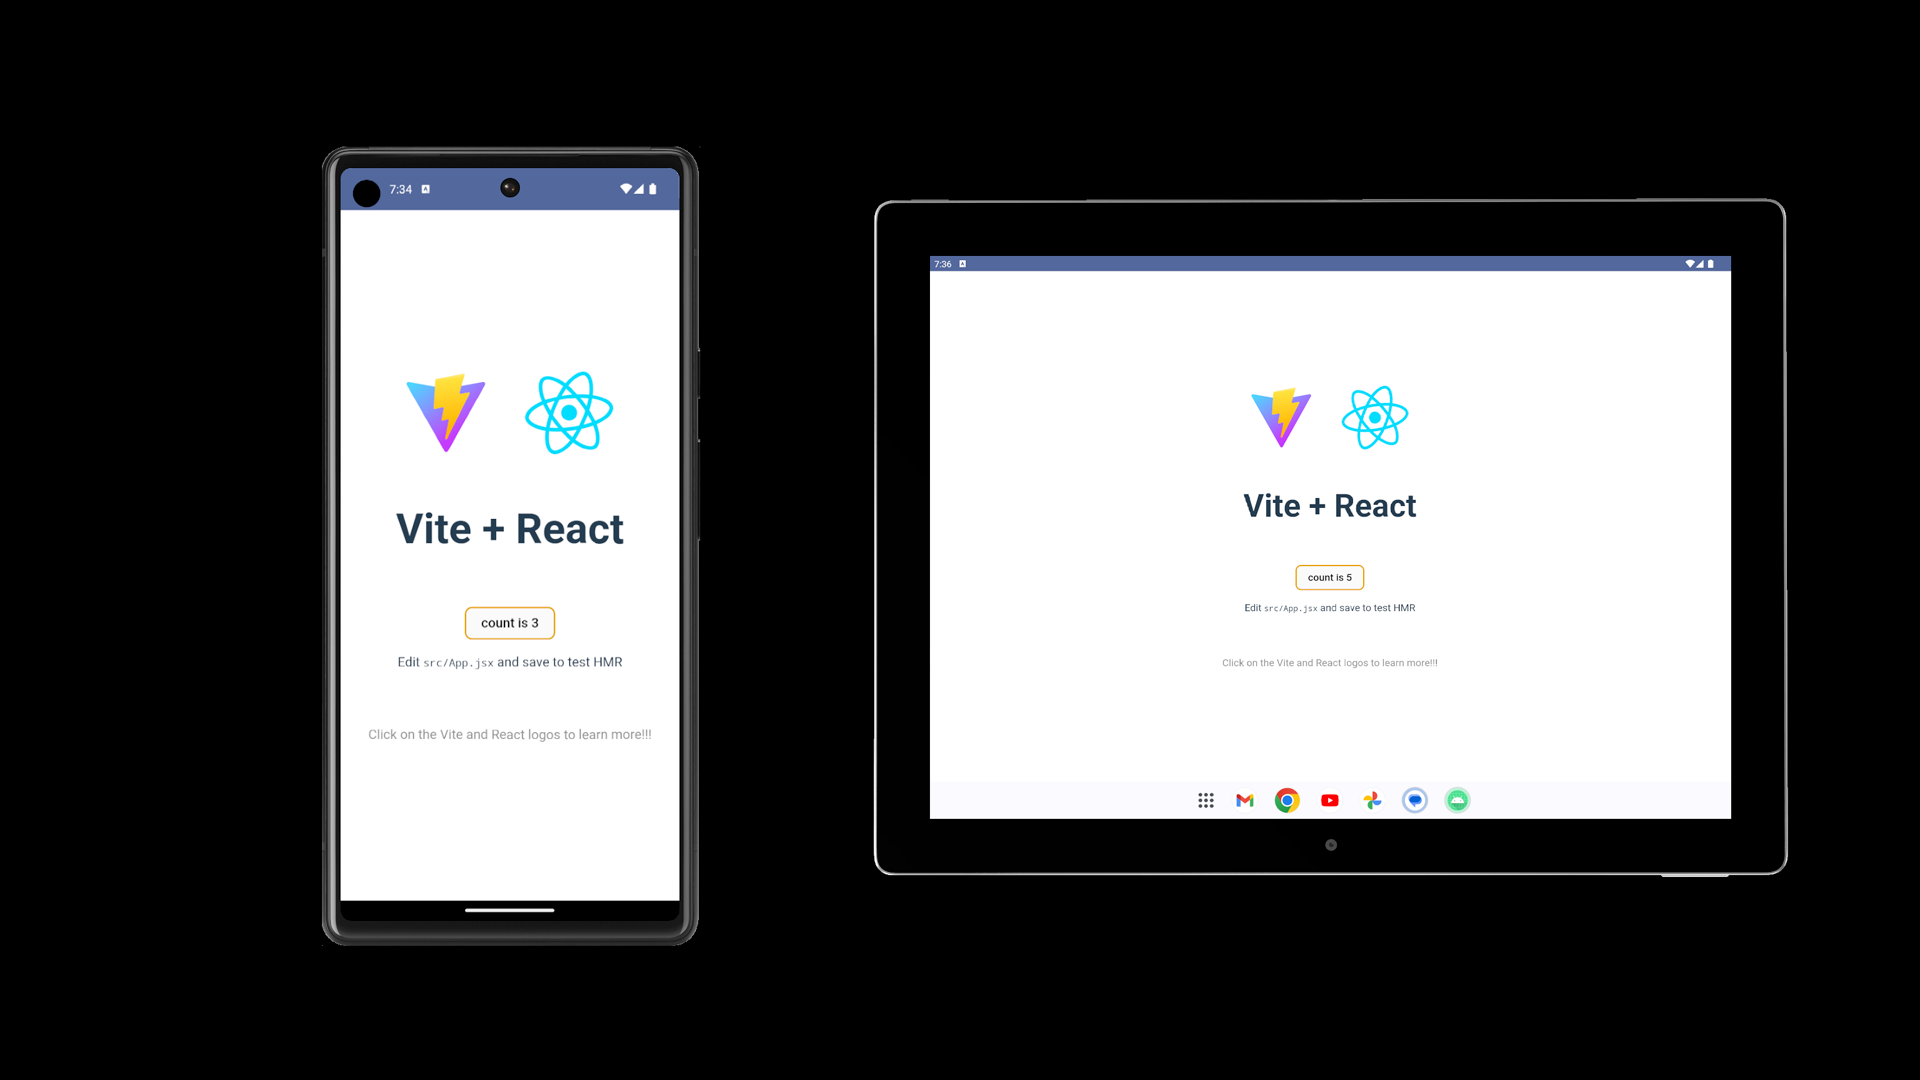 Final Result of running React from Vite on Android